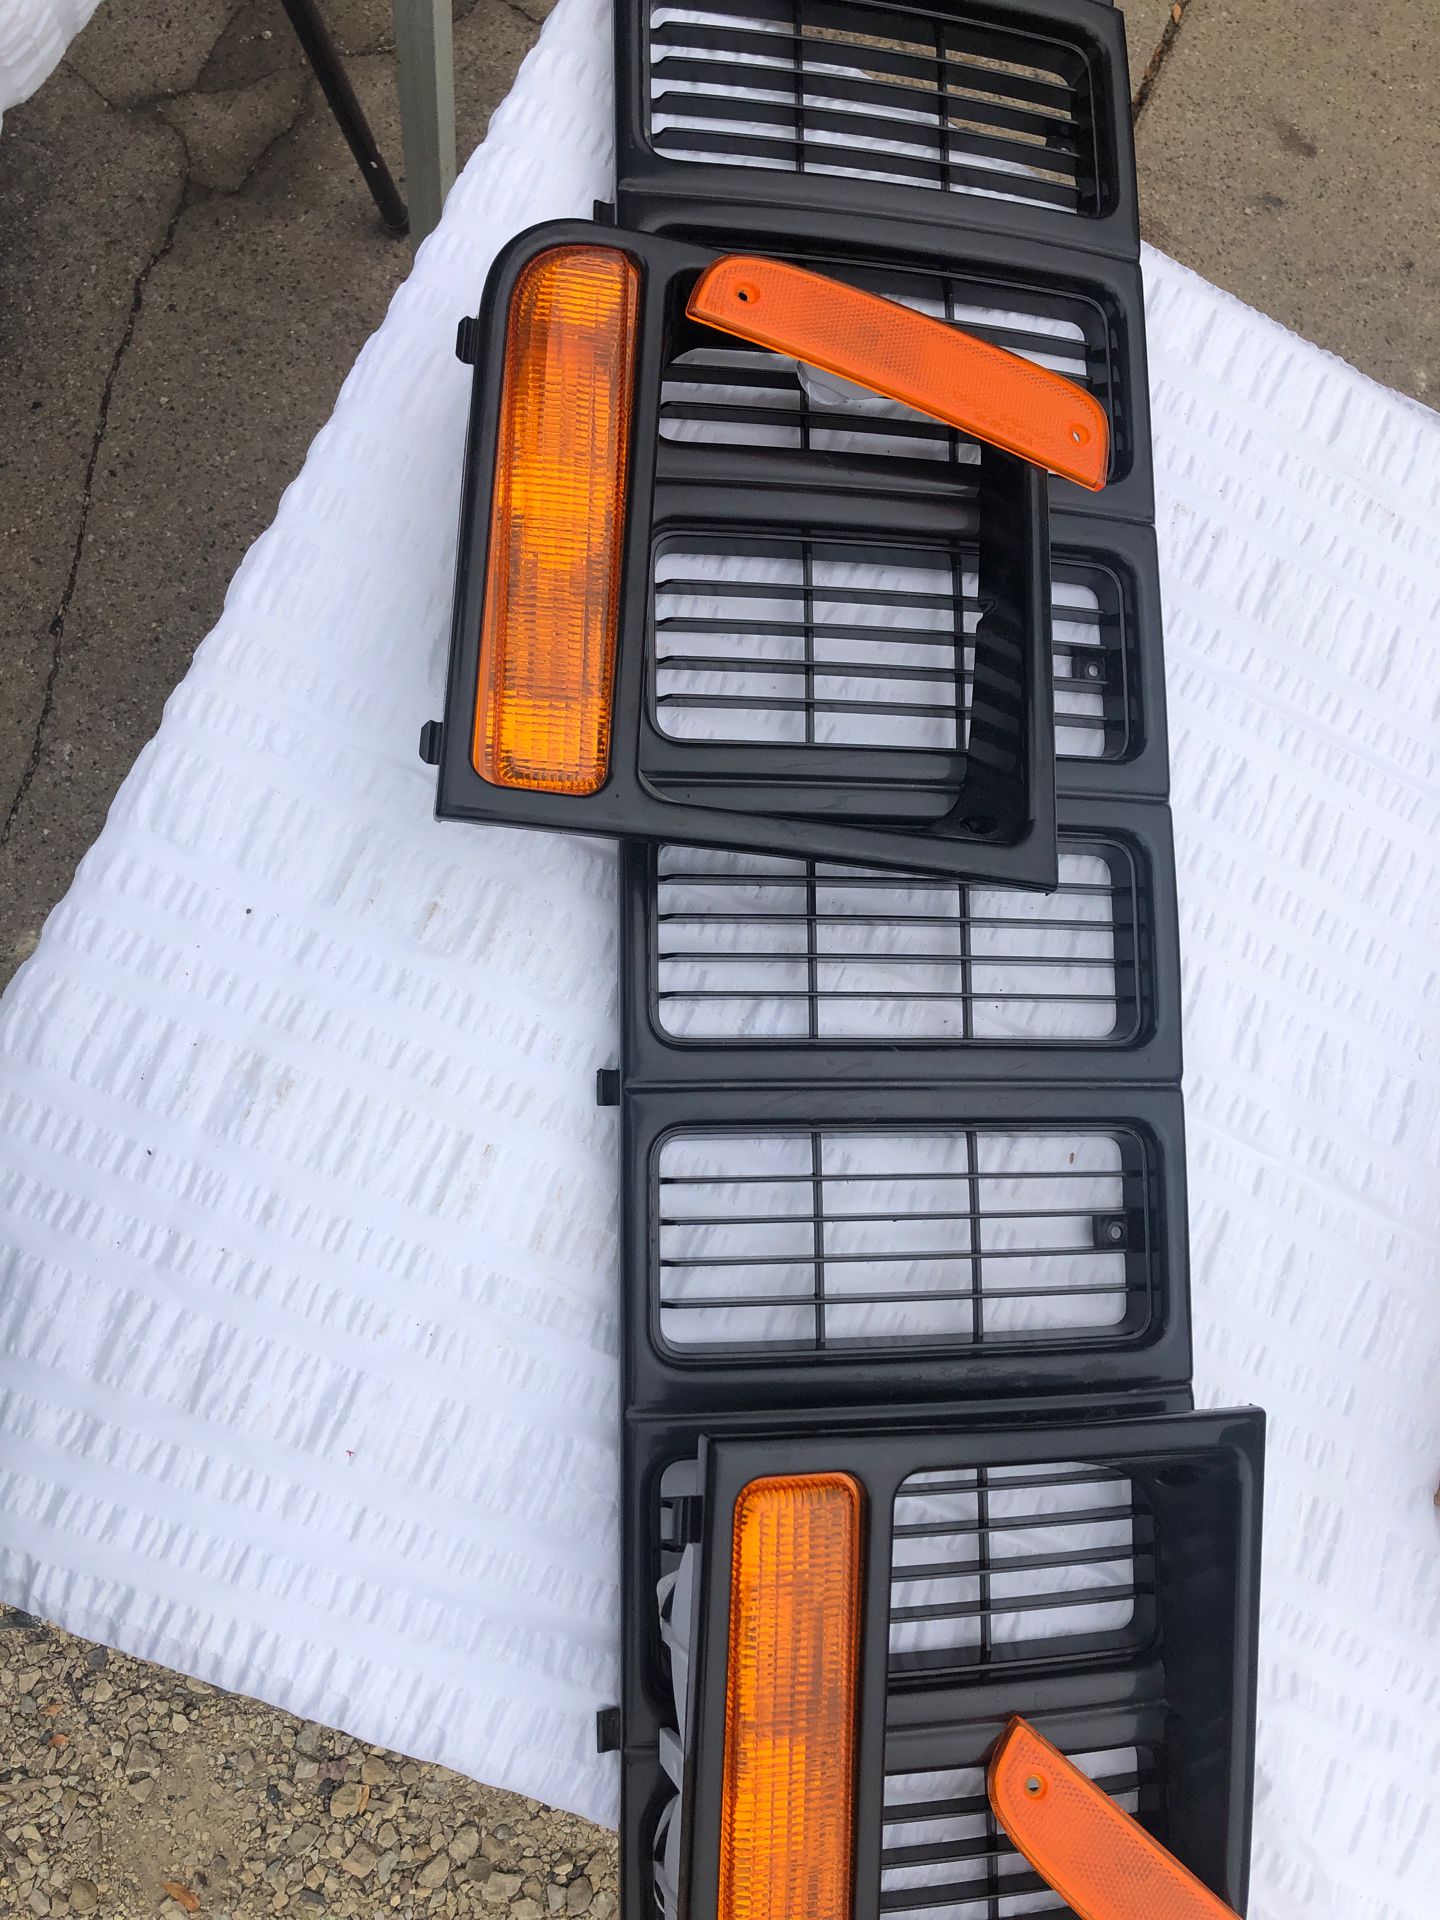 2001 Jeep Cherokee XJ grill, reflectors and turning